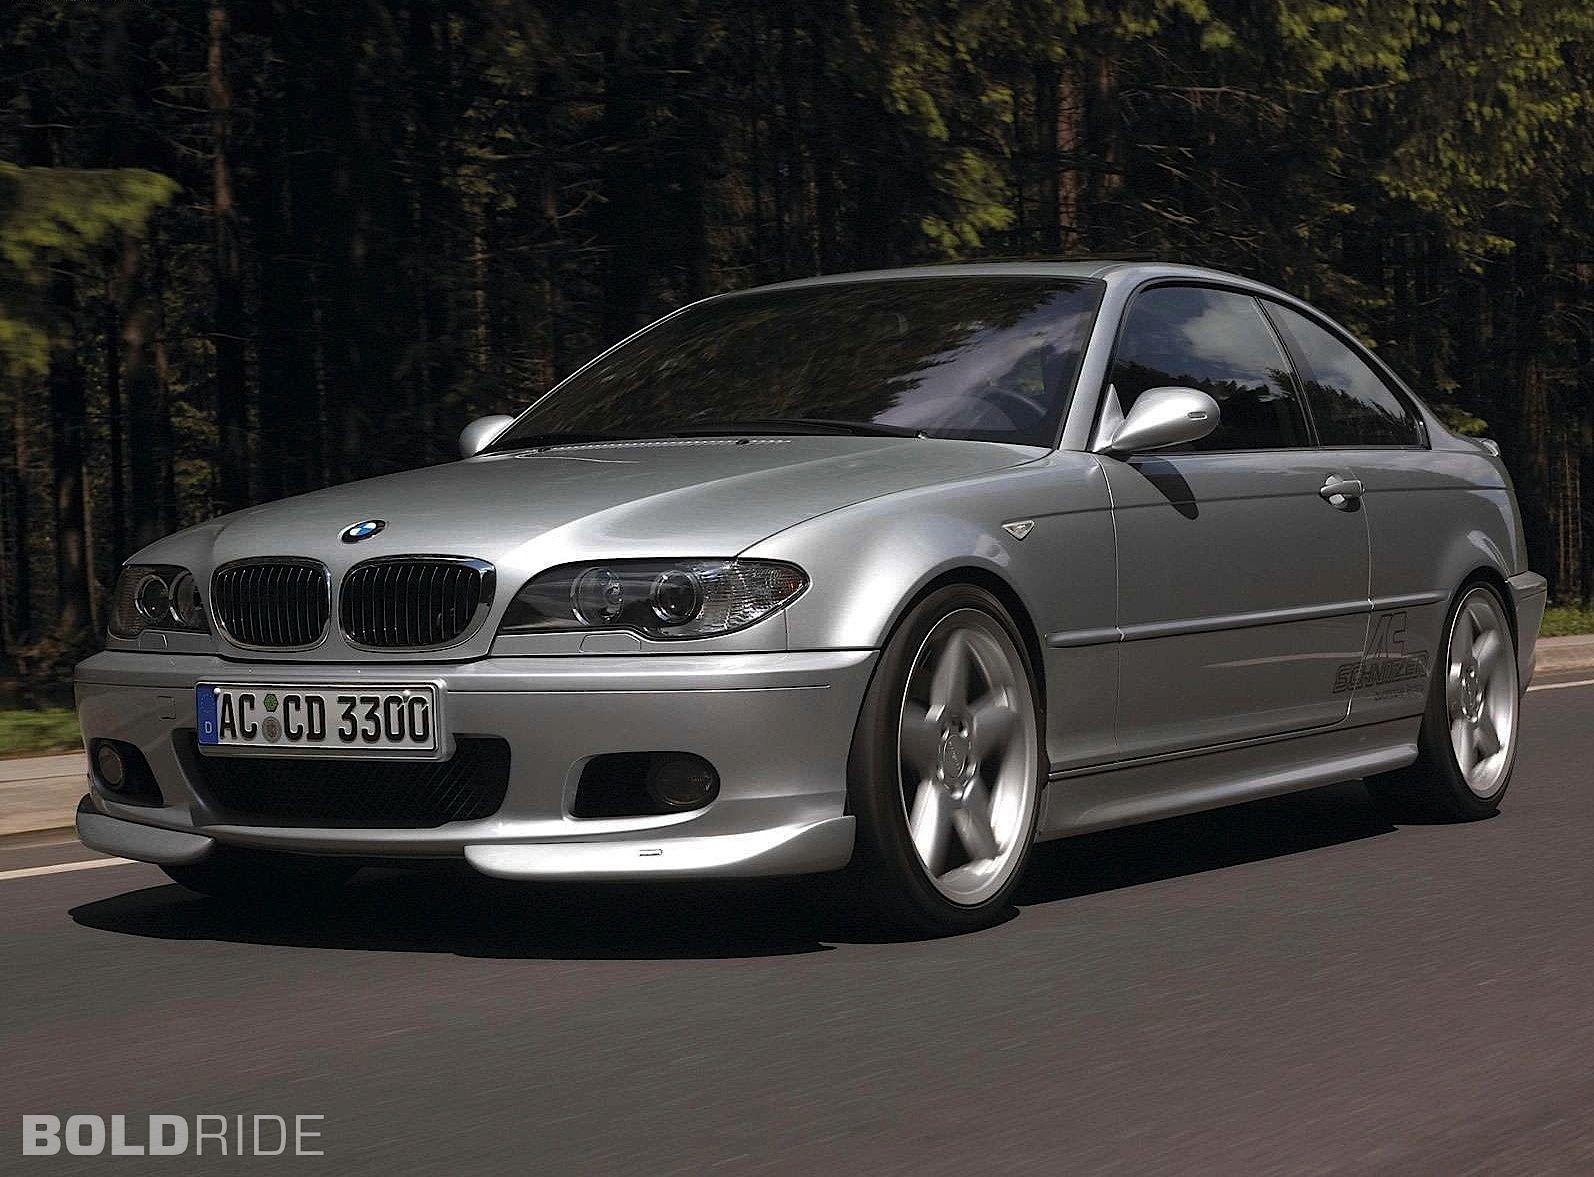 BMW 3 Series Photo and Wallpaper